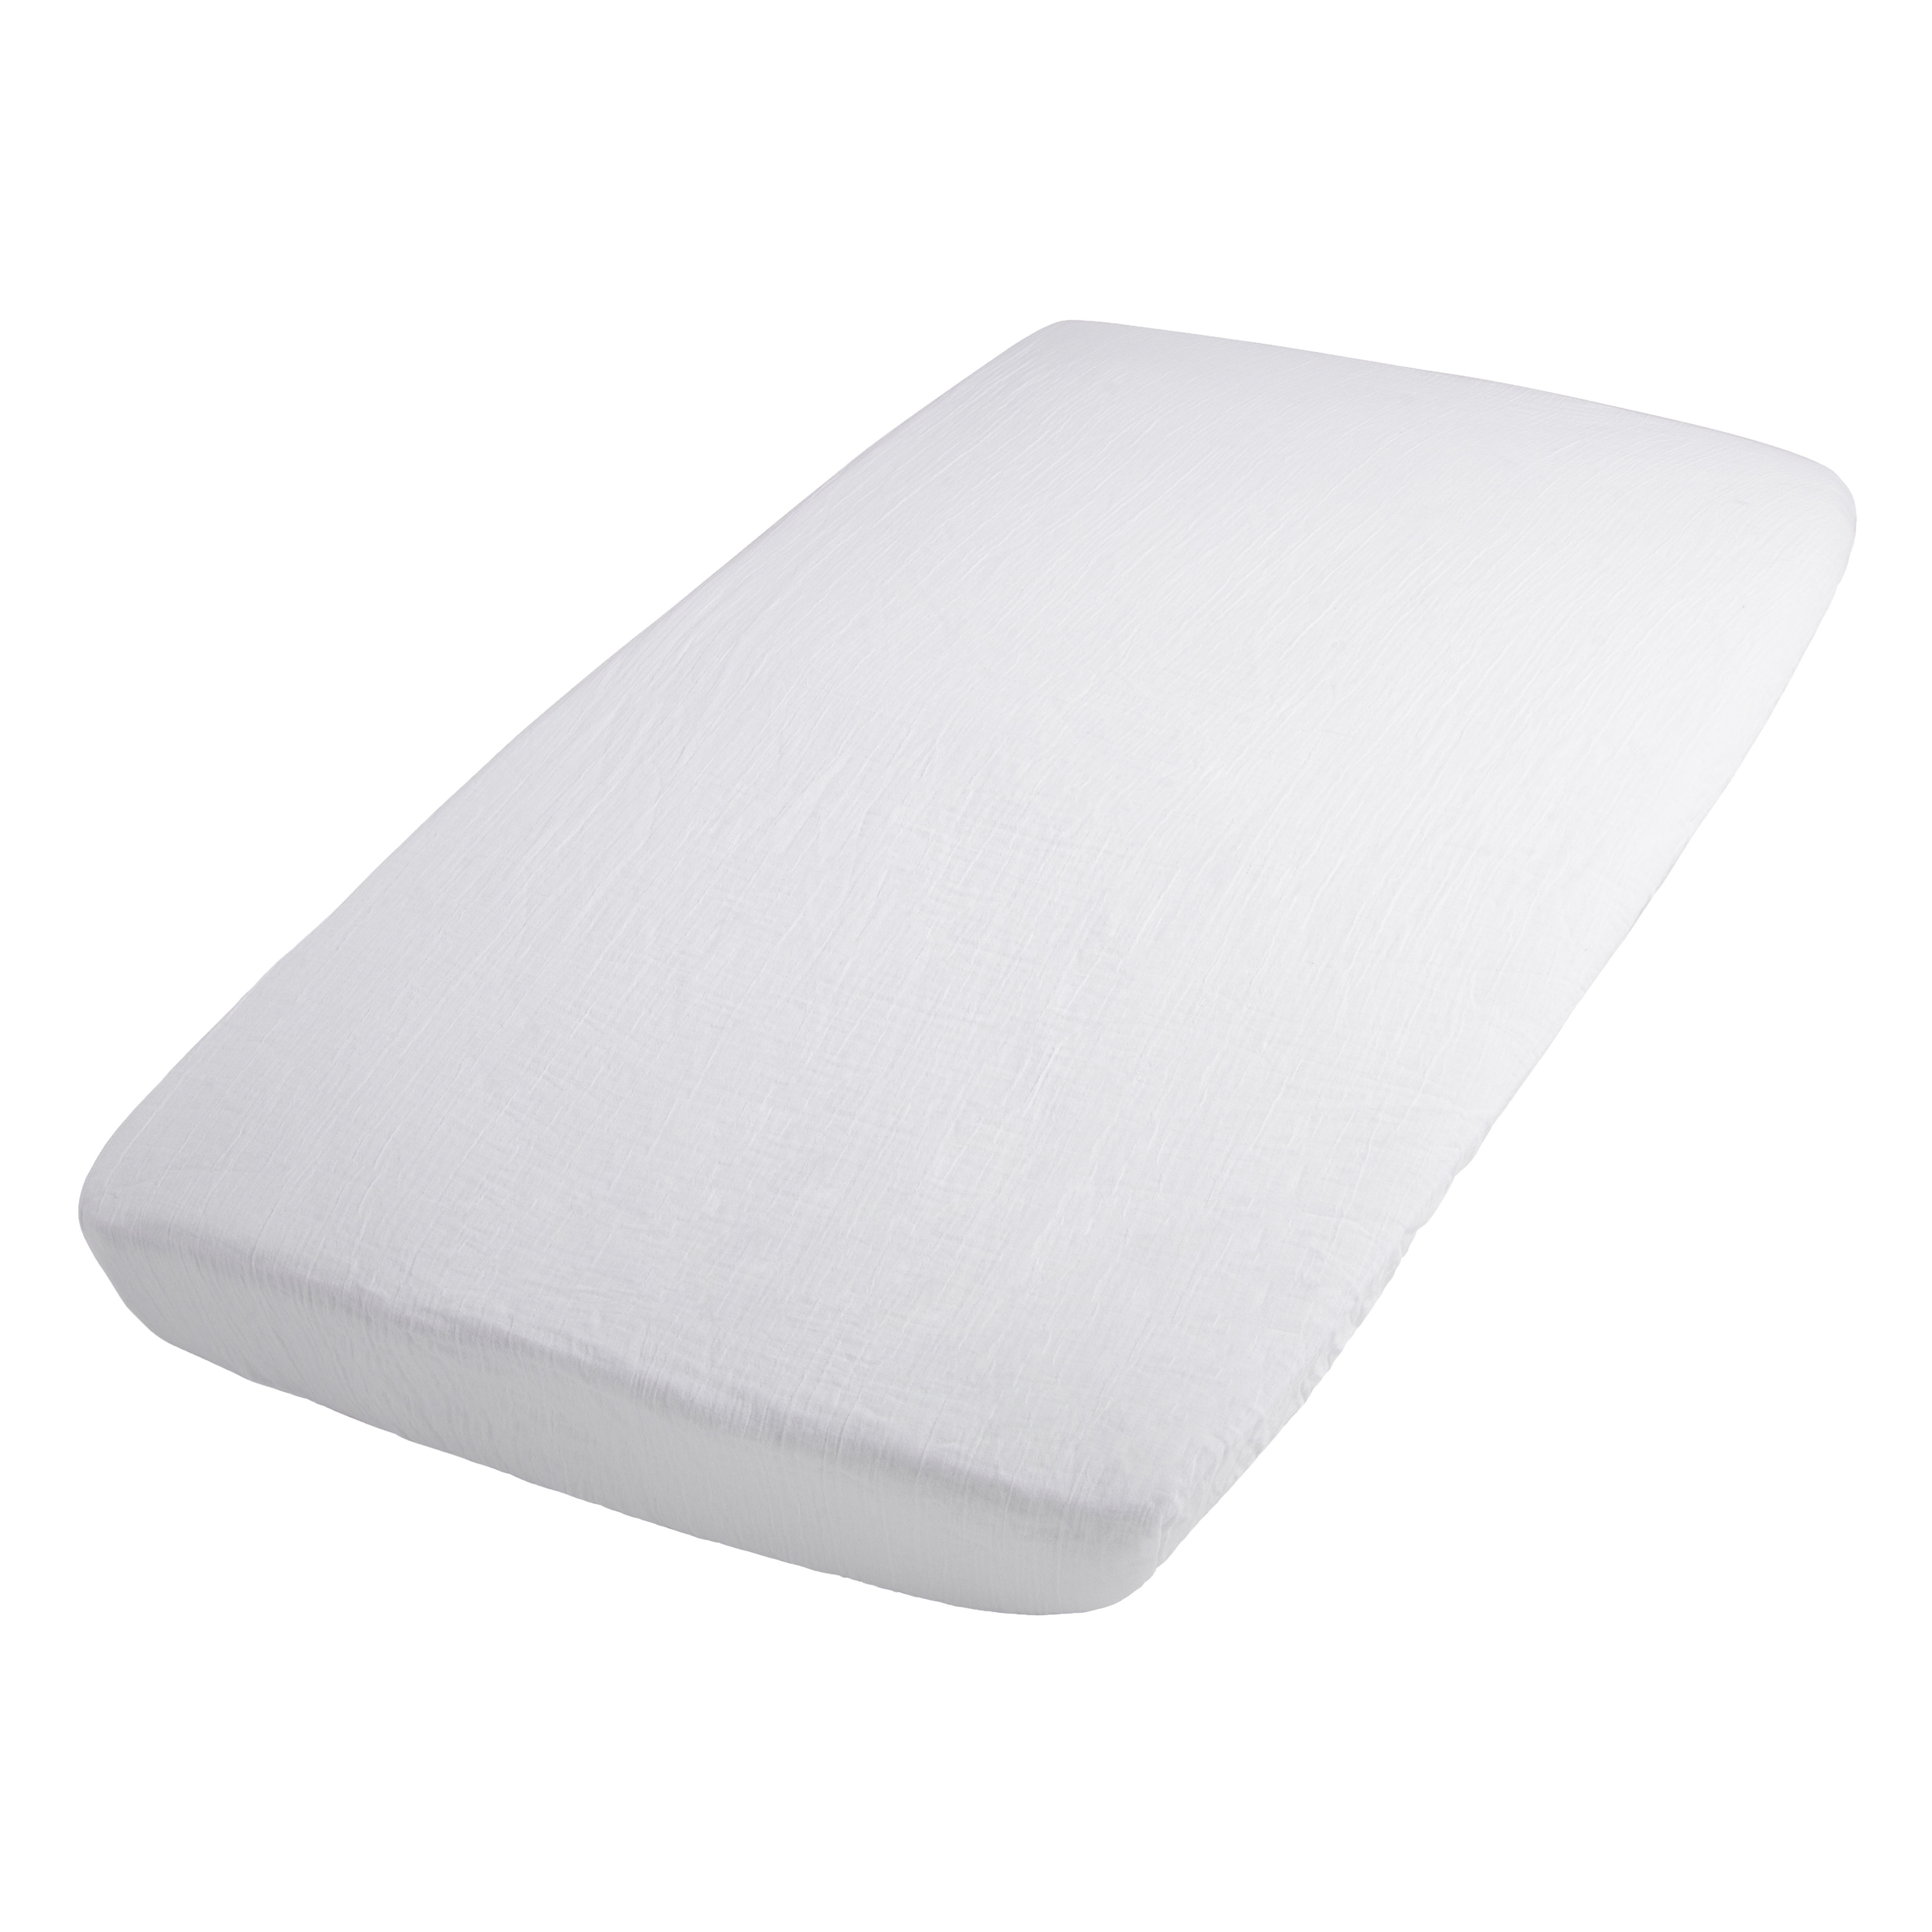 Fitted sheet Breeze white - 60x120